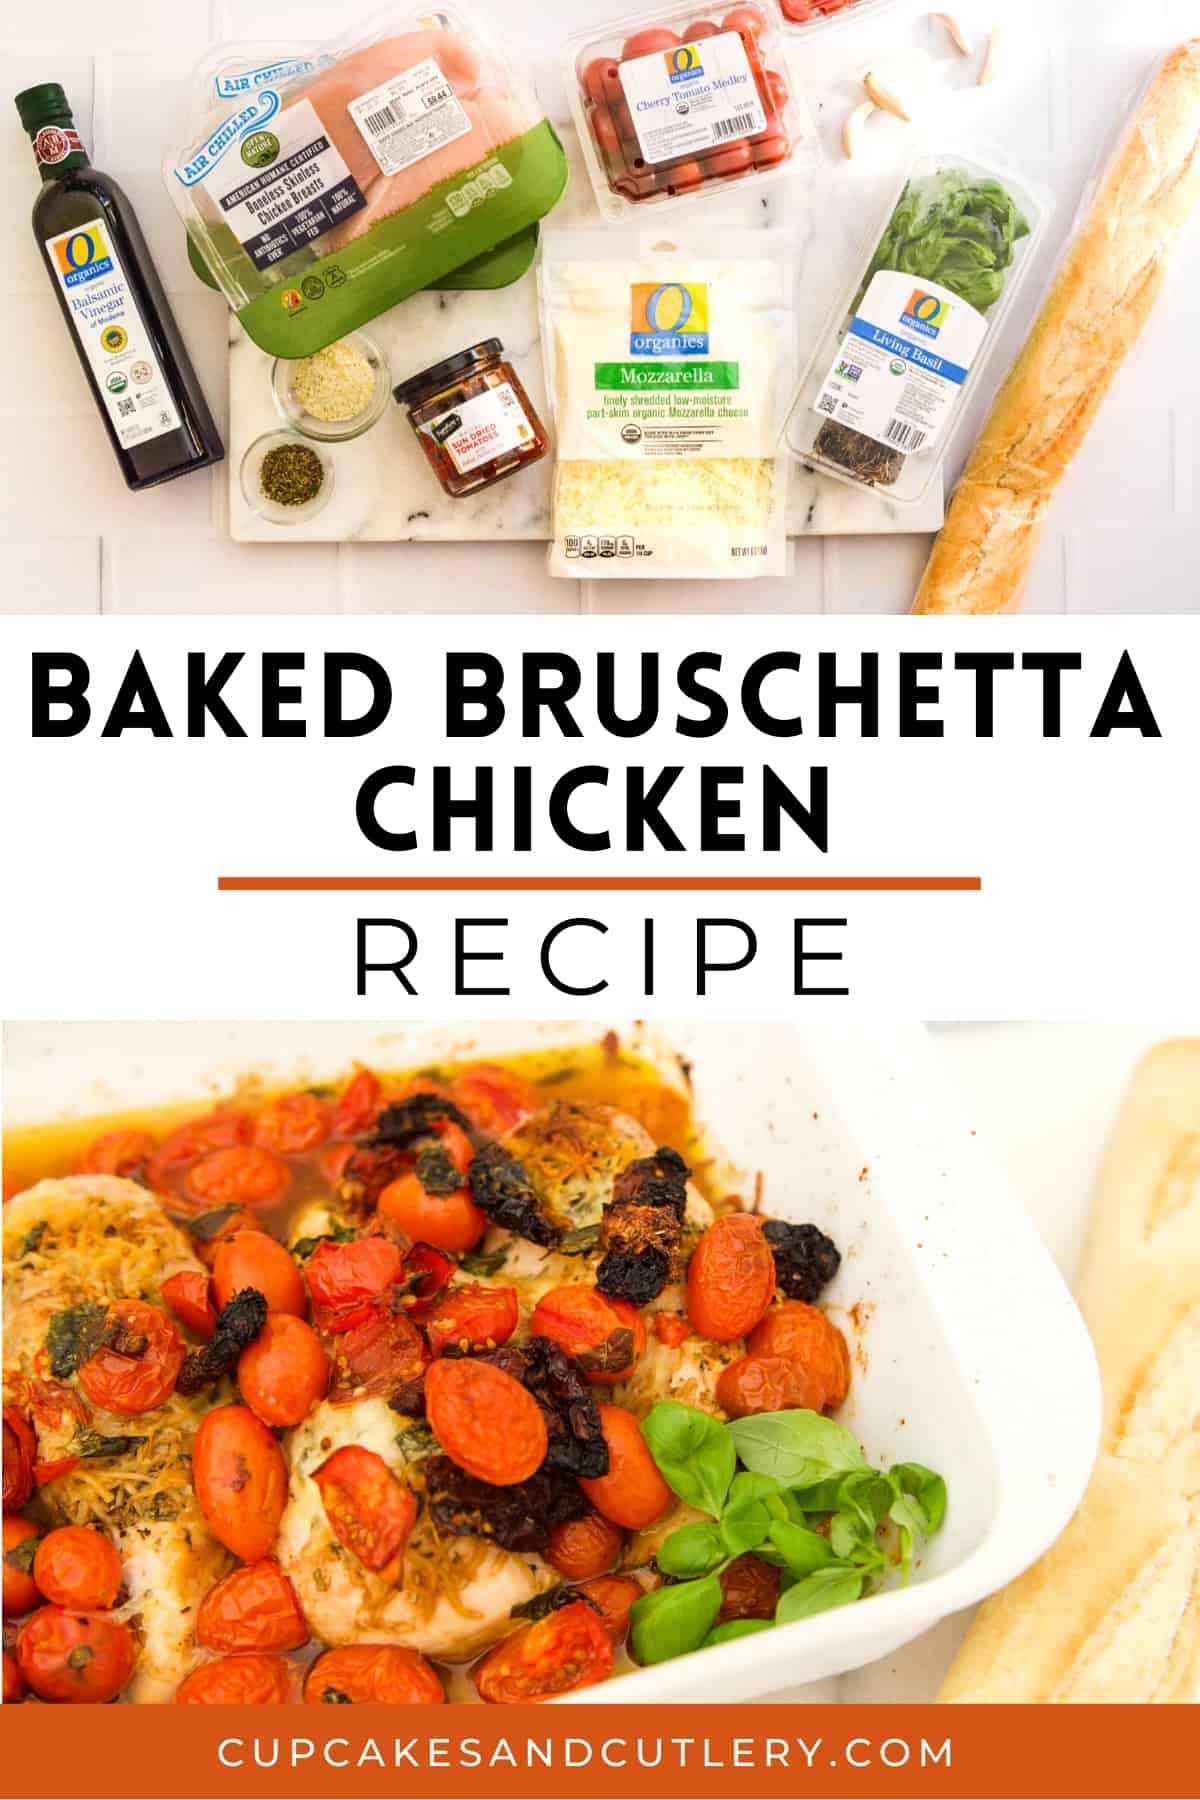 Collage of images for a baked bruschetta chicken recipe for dinner with text.